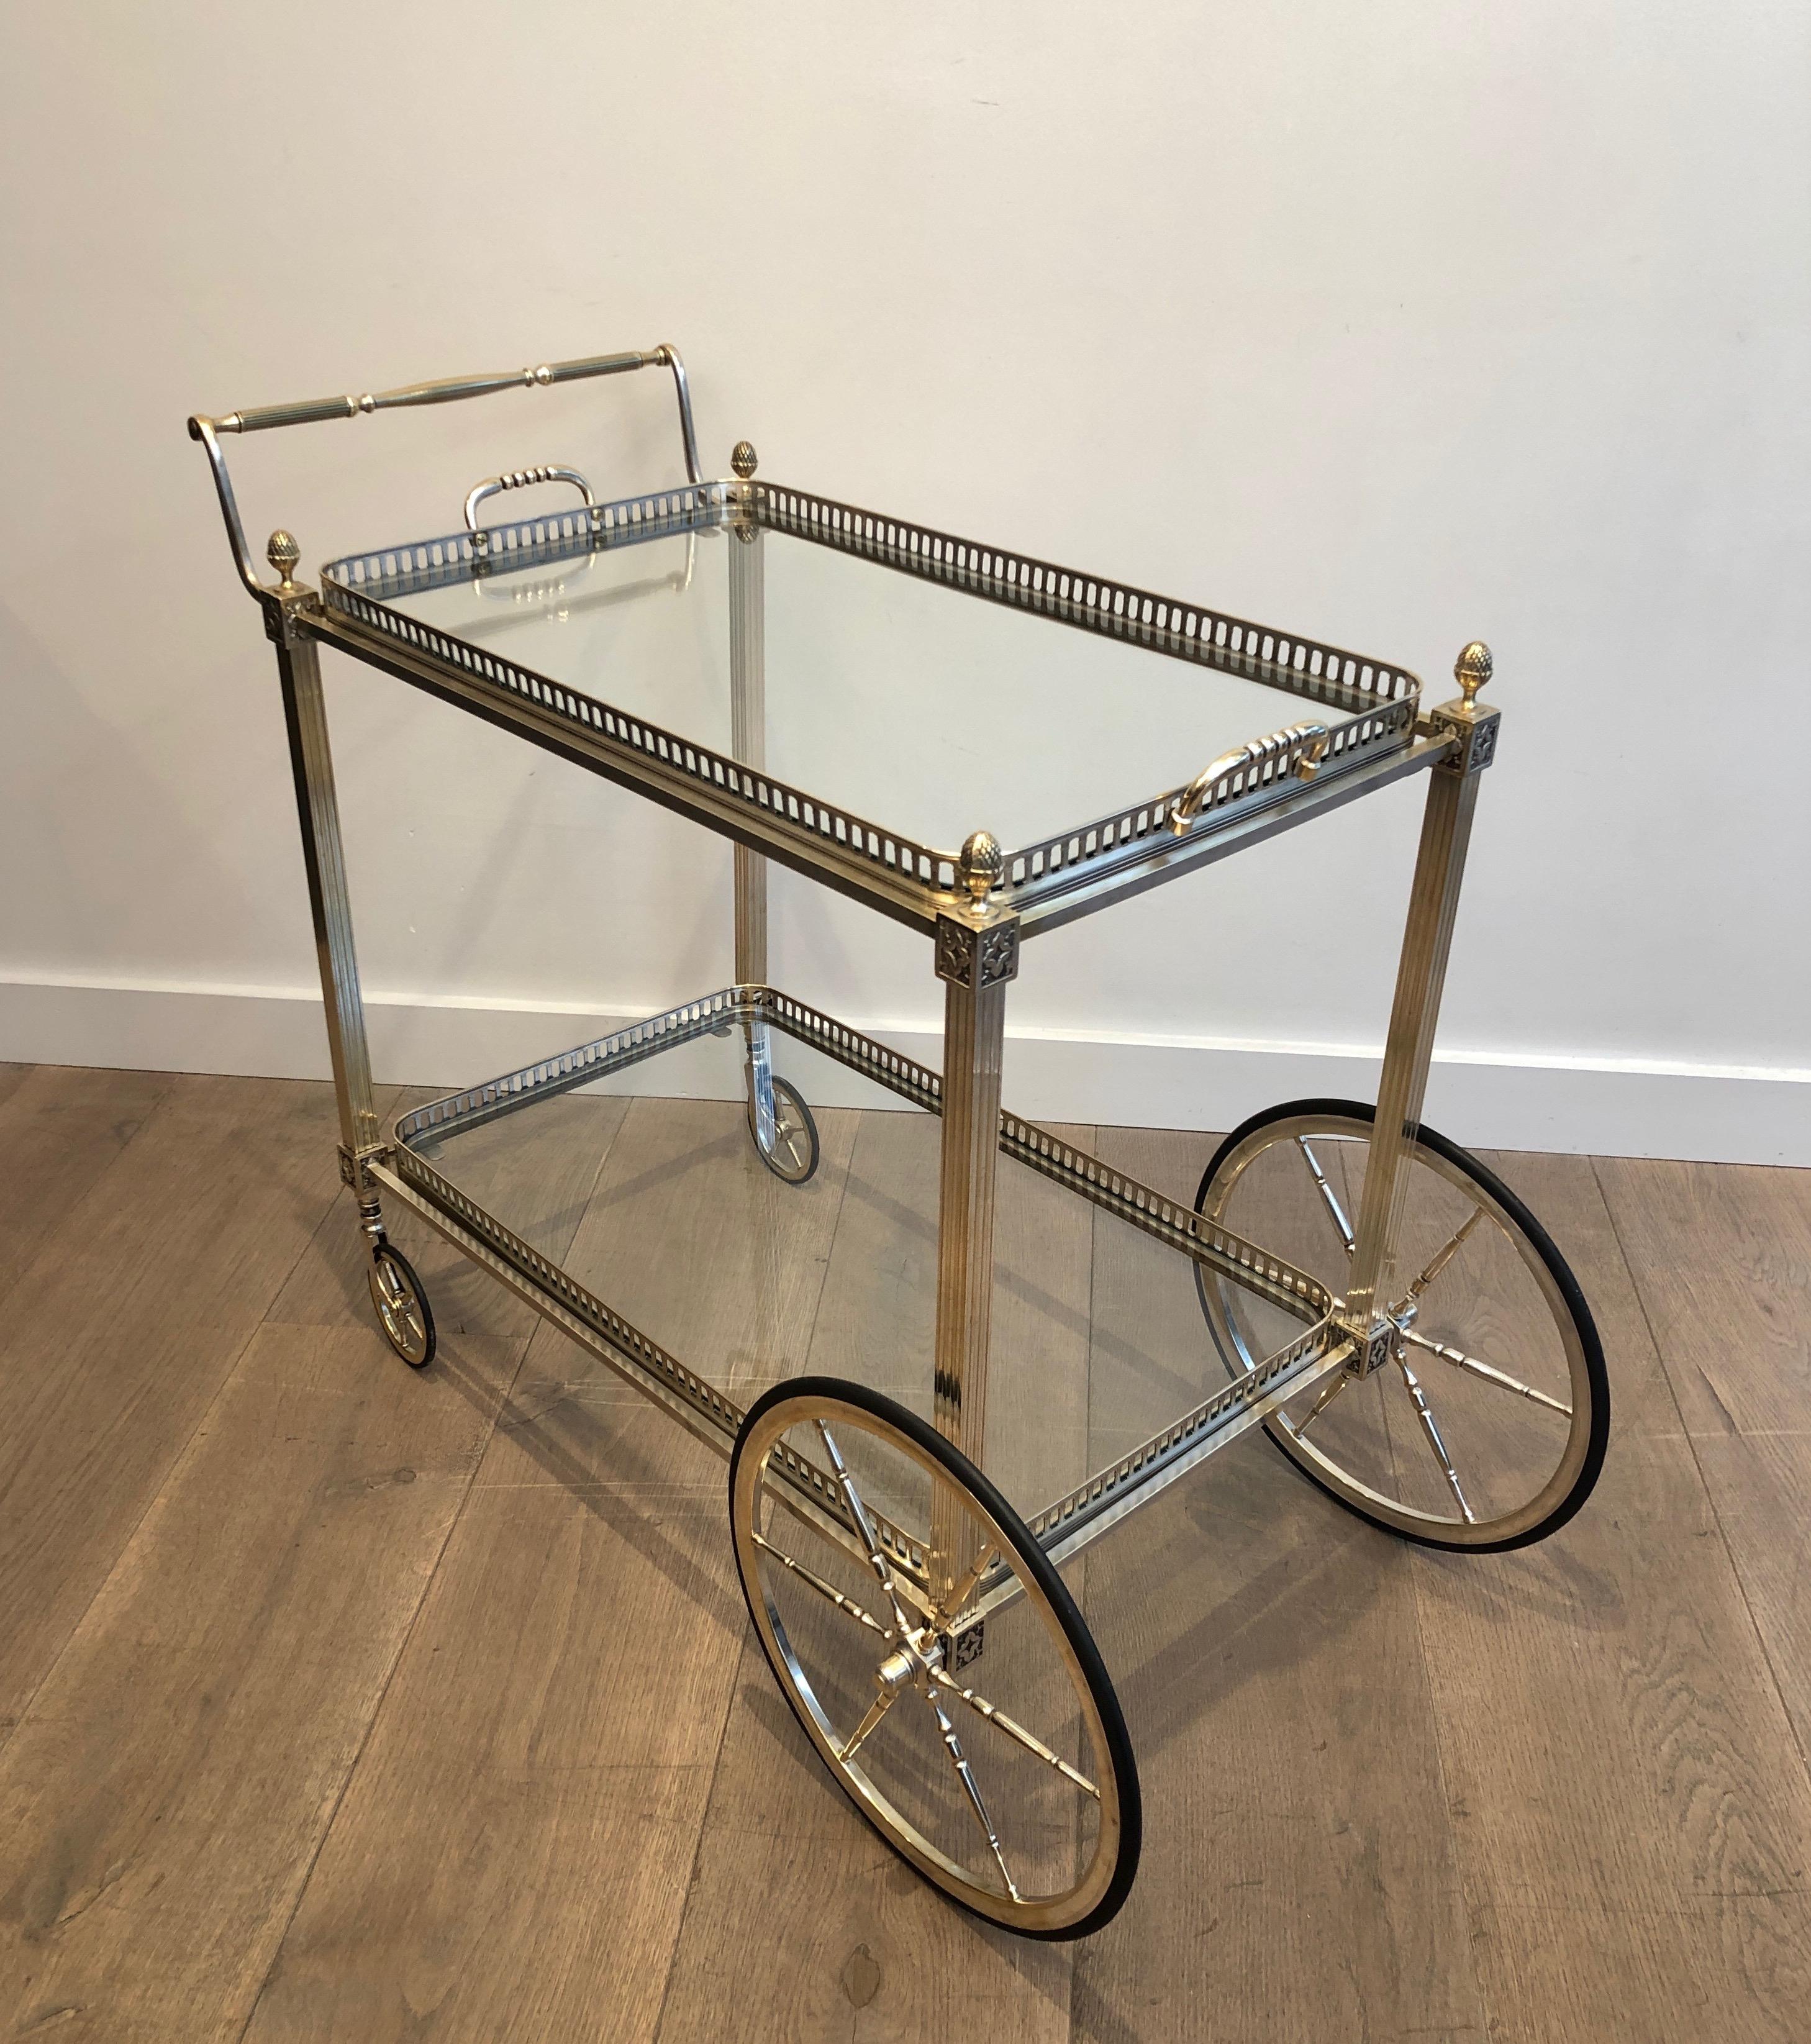 This neoclassical style bar cart is made of silver on brass with Decorated with fleurs de lys decor. The silver is a bit used by time which makes a very nice silver and brass patina. This is a French work by famous French designer Maison Bagués,